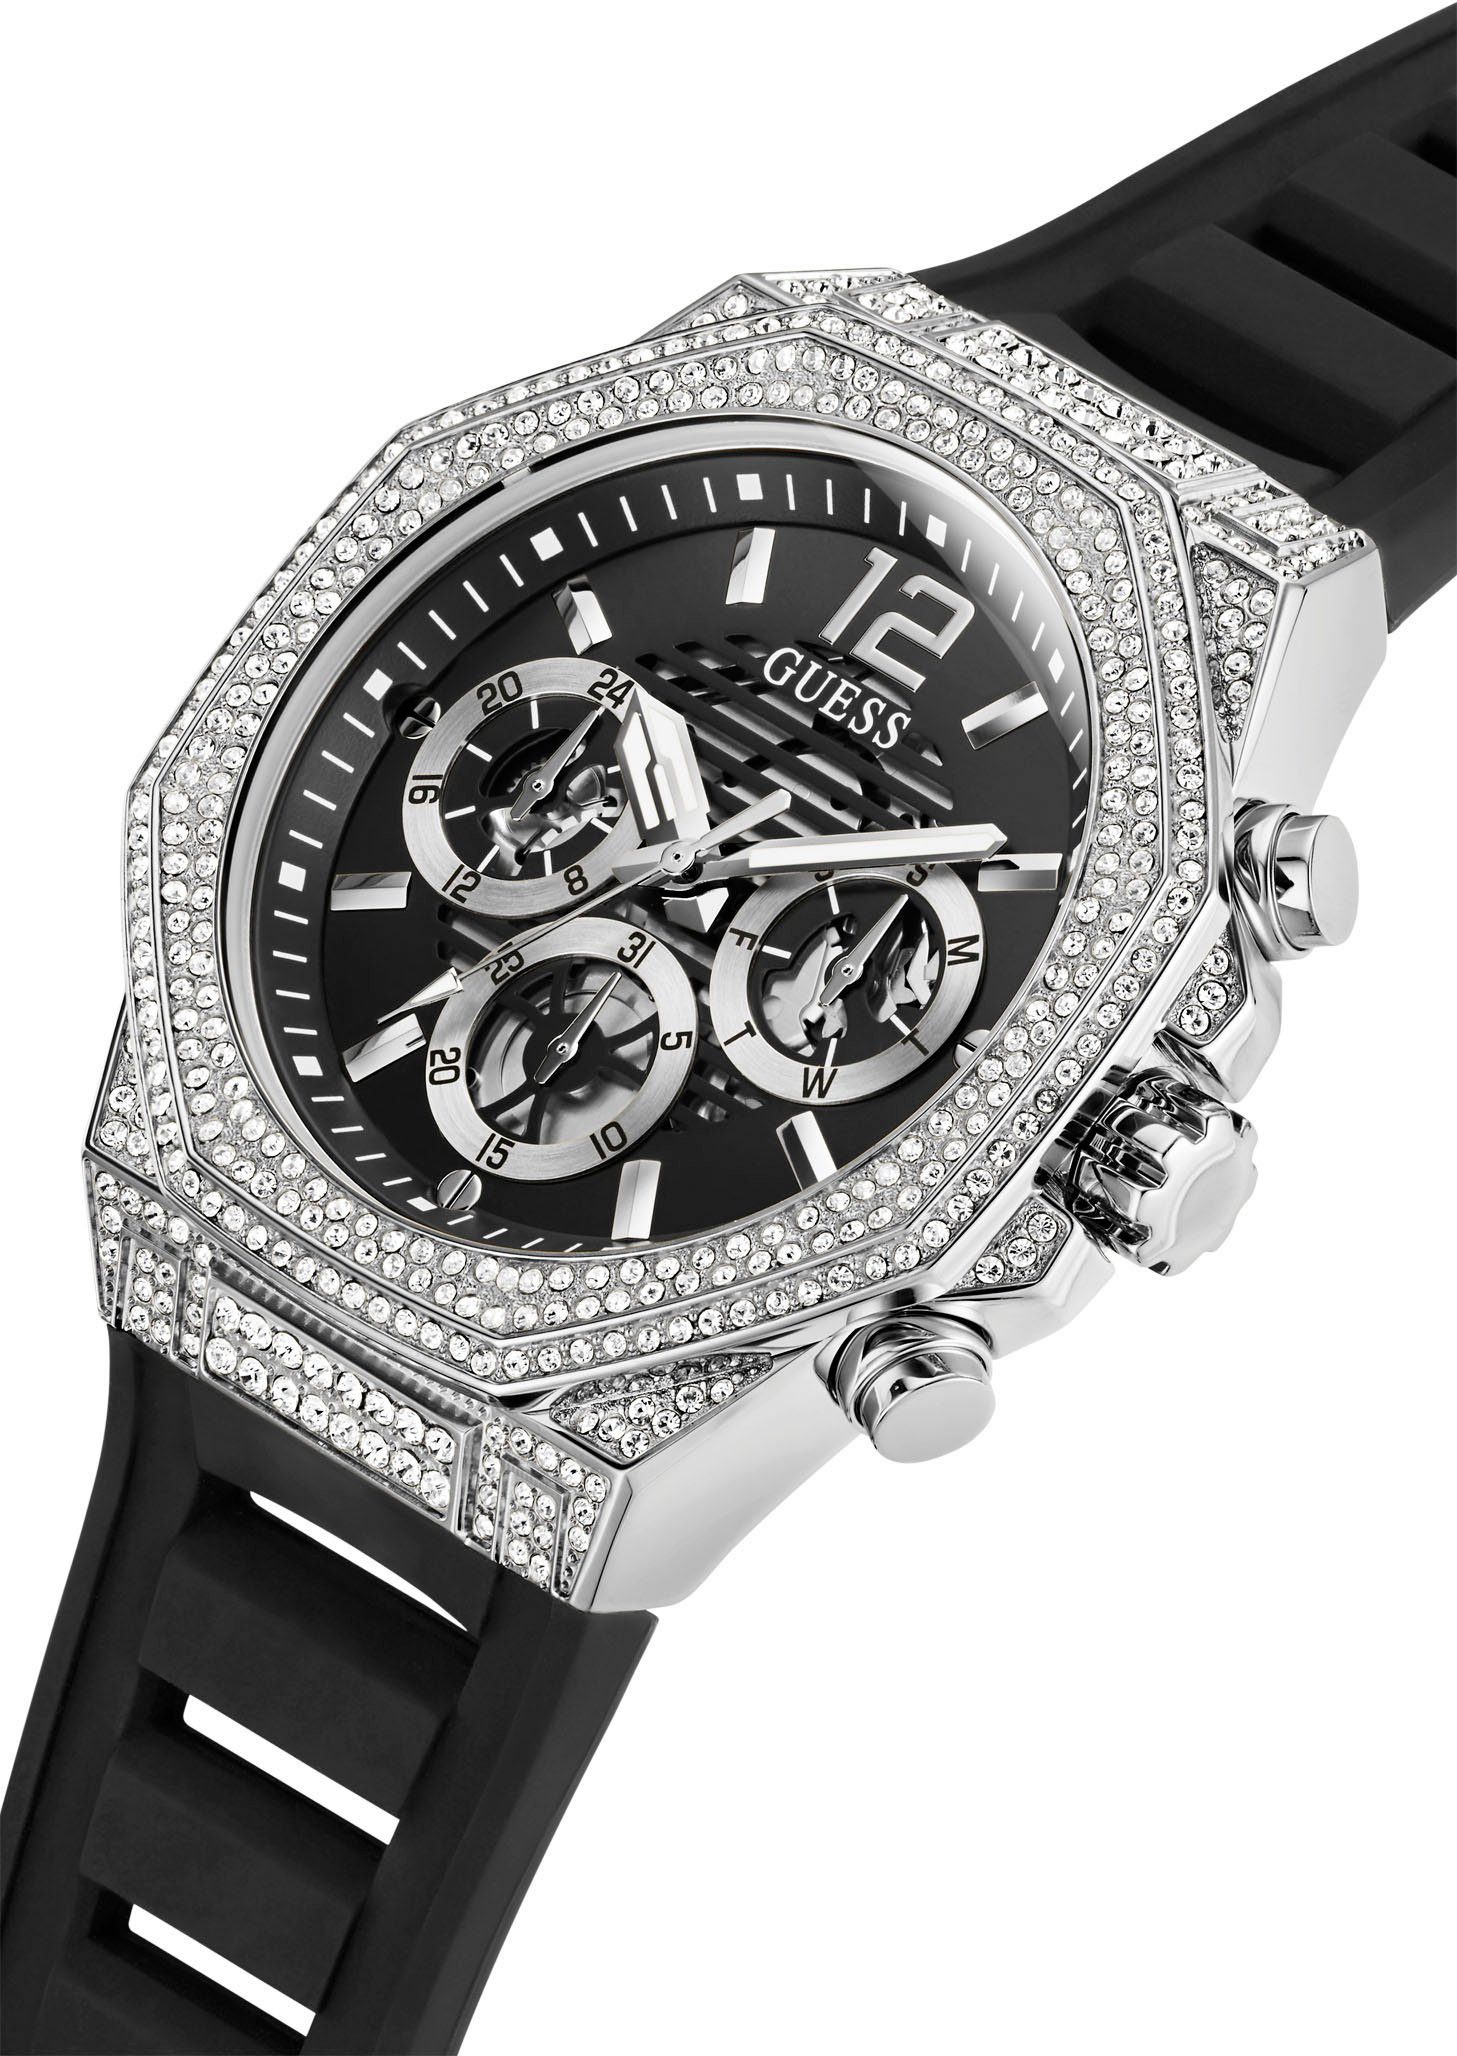 Multifunktionsuhr GW0518G1 Guess